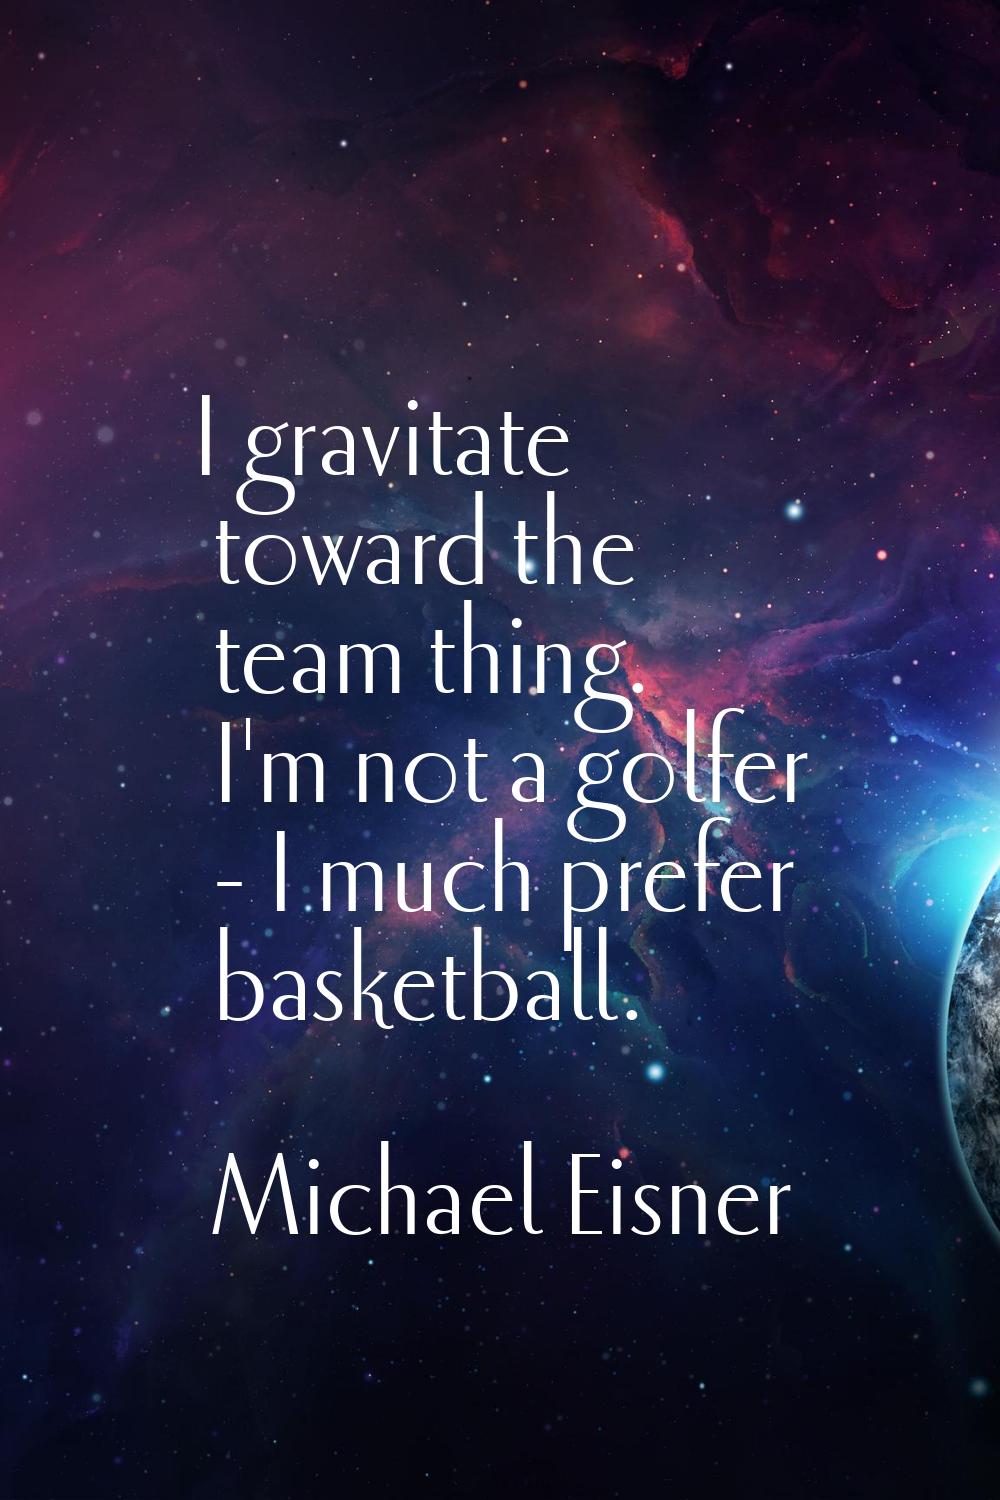 I gravitate toward the team thing. I'm not a golfer - I much prefer basketball.